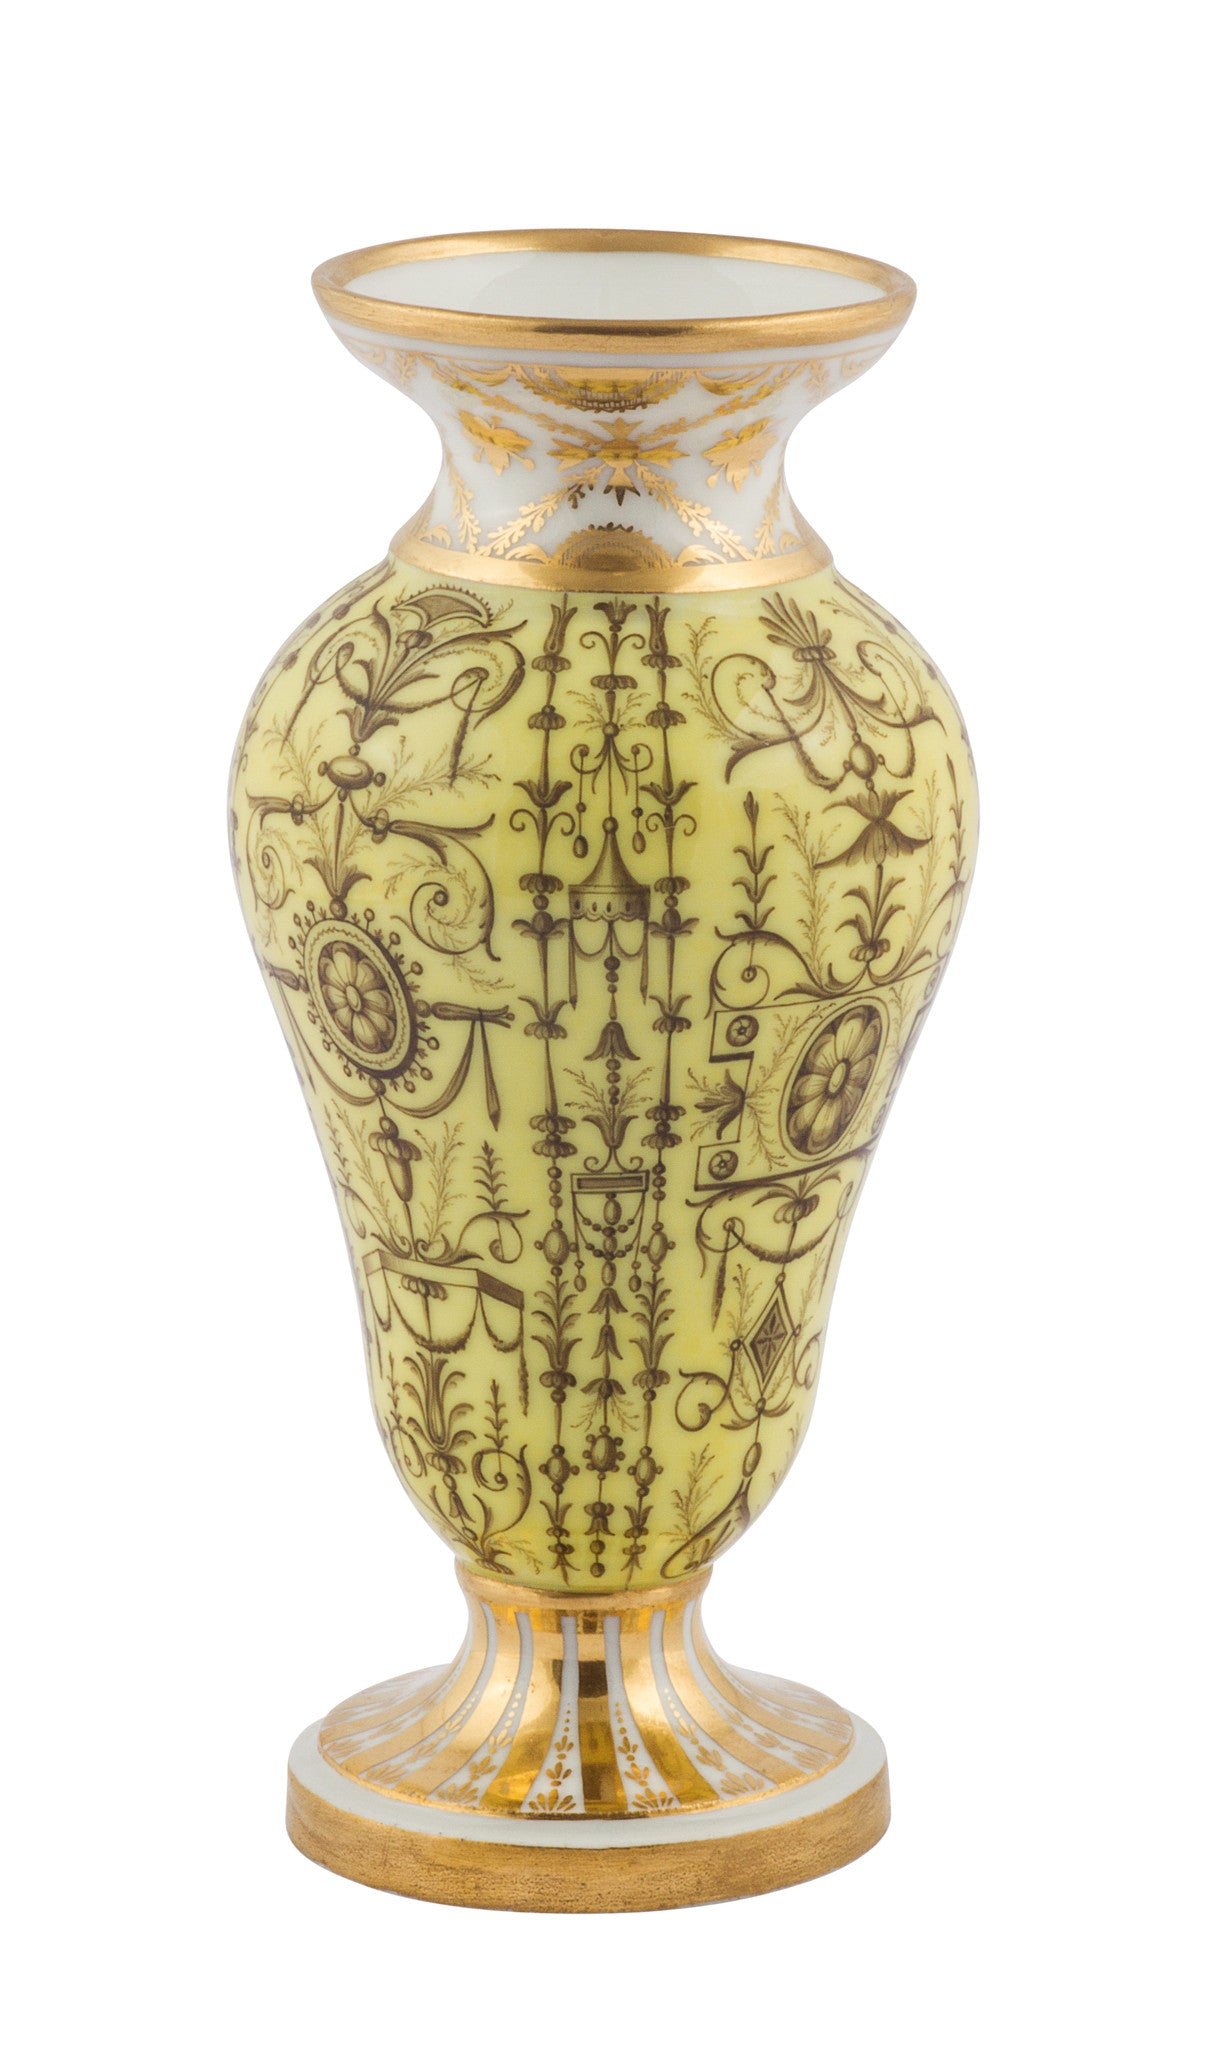 SOLD Paris Porcelain Neo-Classical Yellow-Ground Footed Vase with Arabesques